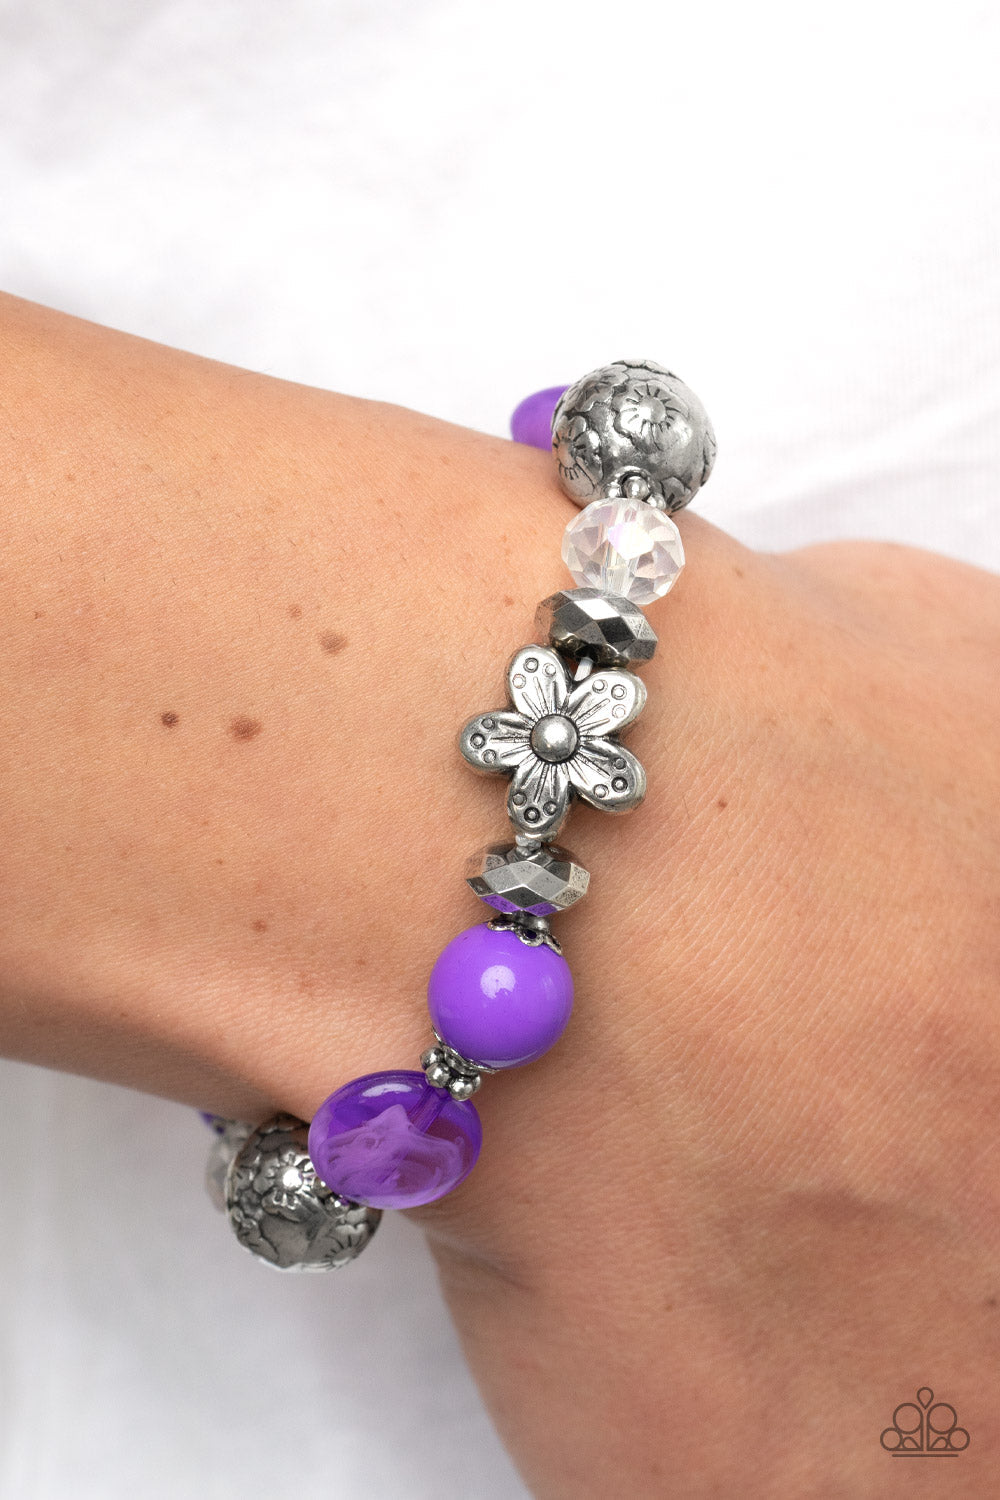 Pretty Persuasion - Purple - Silver - Iridescent Bead - Stretchy Bracelet - Paparazzi Accessories  - assortment of silver floral beads and studded silver rings join an opaque, glassy, and iridescent assortment of purple and white beads along a stretchy band around the wrist for a whimsical pop of color. Sold as one individual bracelet.  Bejeweled Accessories By Kristie - Trendy fashion jewelry for everyone -